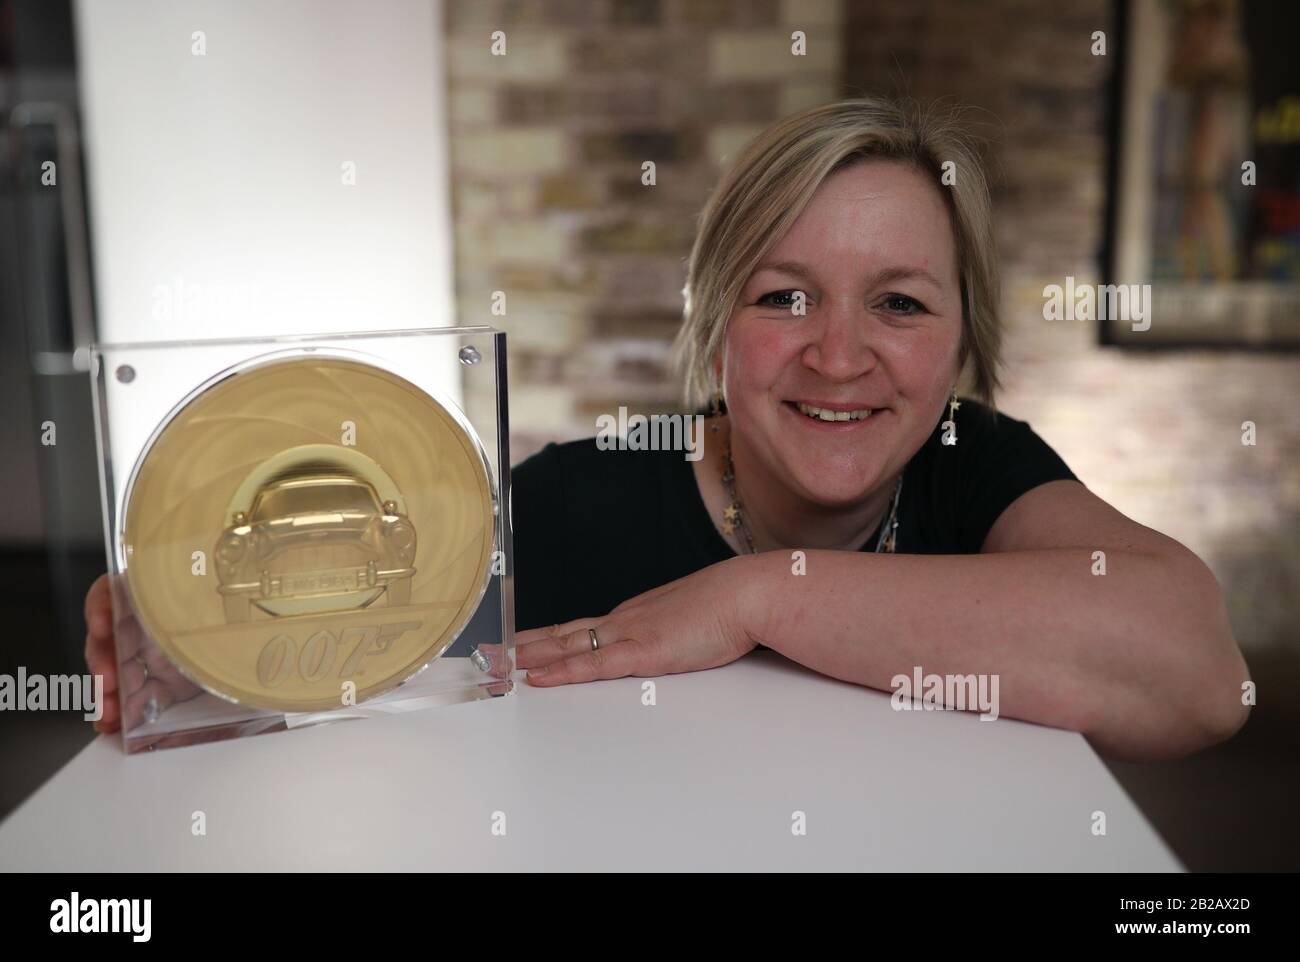 Royal Mint designer Laura Clancy, who designed a unique 7 kilo gold James Bond coin - which is the largest coin with the highest face value to be produced in the Mint's 1,100-year history - during the launch of a new James Bond coin and gold bar collection ahead of the release of the 25th James Bond film, No Time To Die, at the Bond in Motion exhibition at the London Film Museum, London. PA Photo. Picture date: Monday March 2, 2020. See PA story MONEY Bond. Photo credit should read: Yui Mok/PA Wire Stock Photo